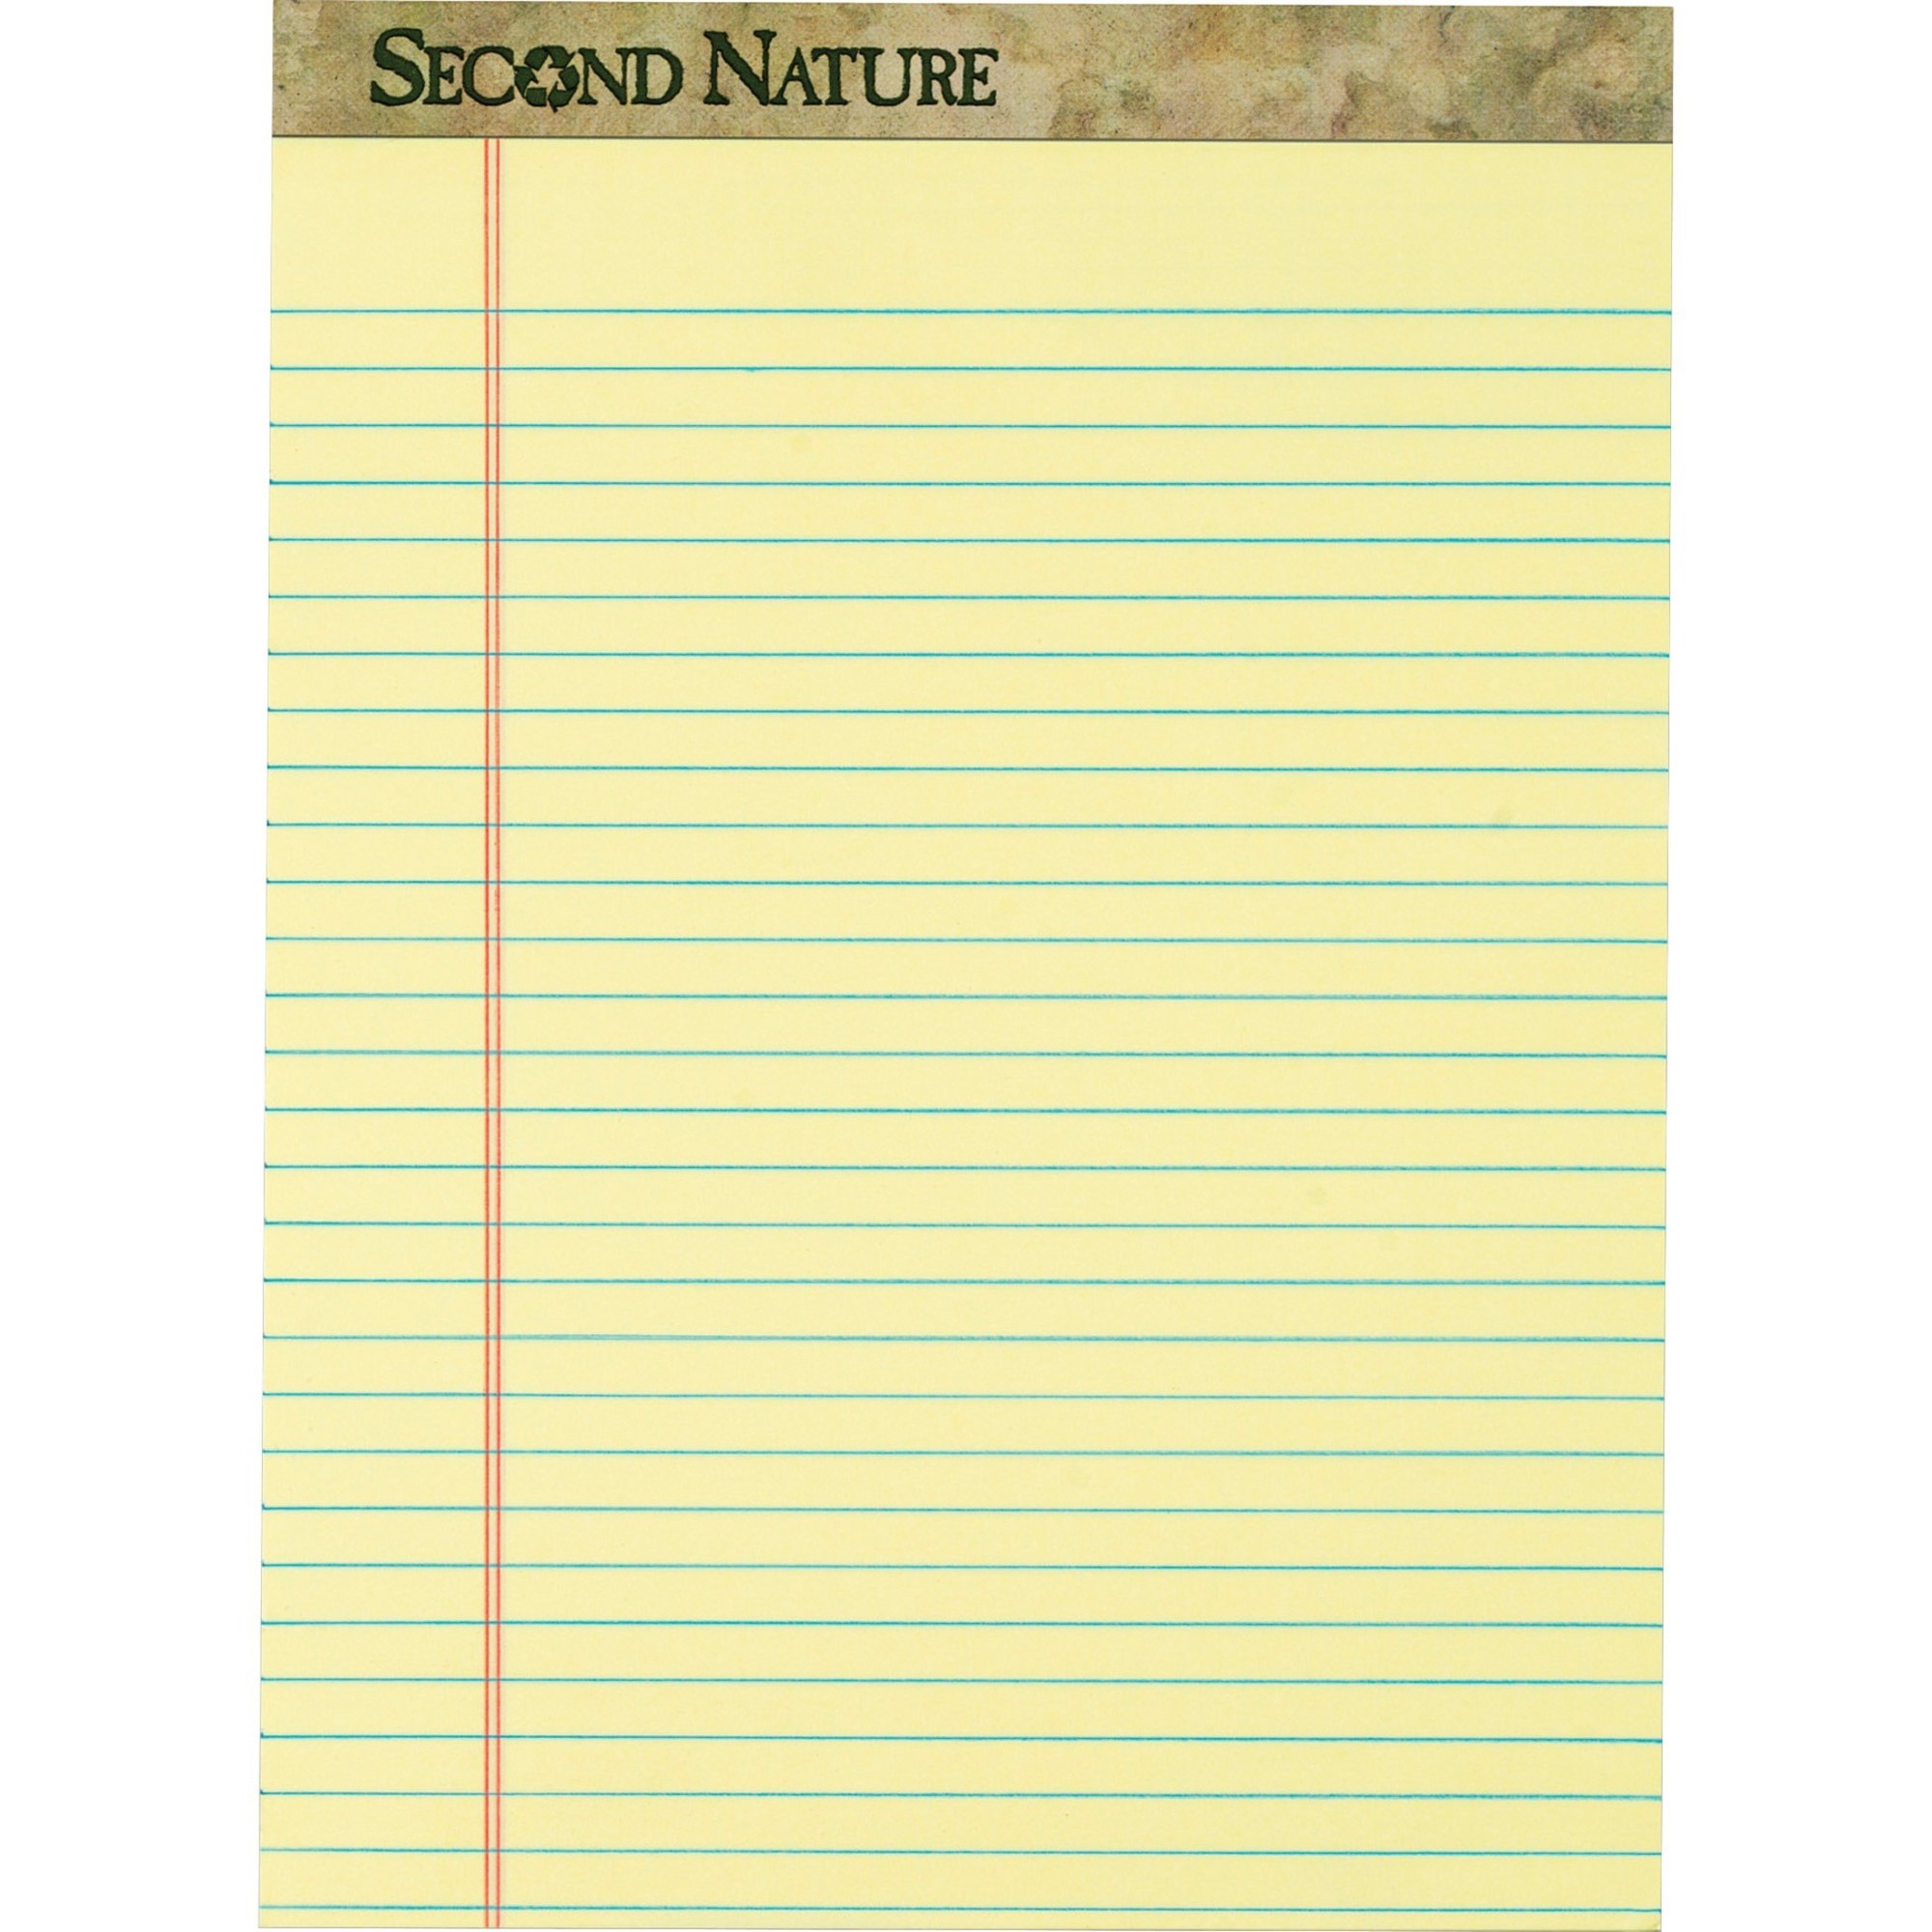 TOPS Second Nature Ruled Canary Writing Pads - 50 Sheets - 0.34" Ruled - Red Margin - 15 lb Basis Weight - 8 1/2" x 11 3/4" - Ca